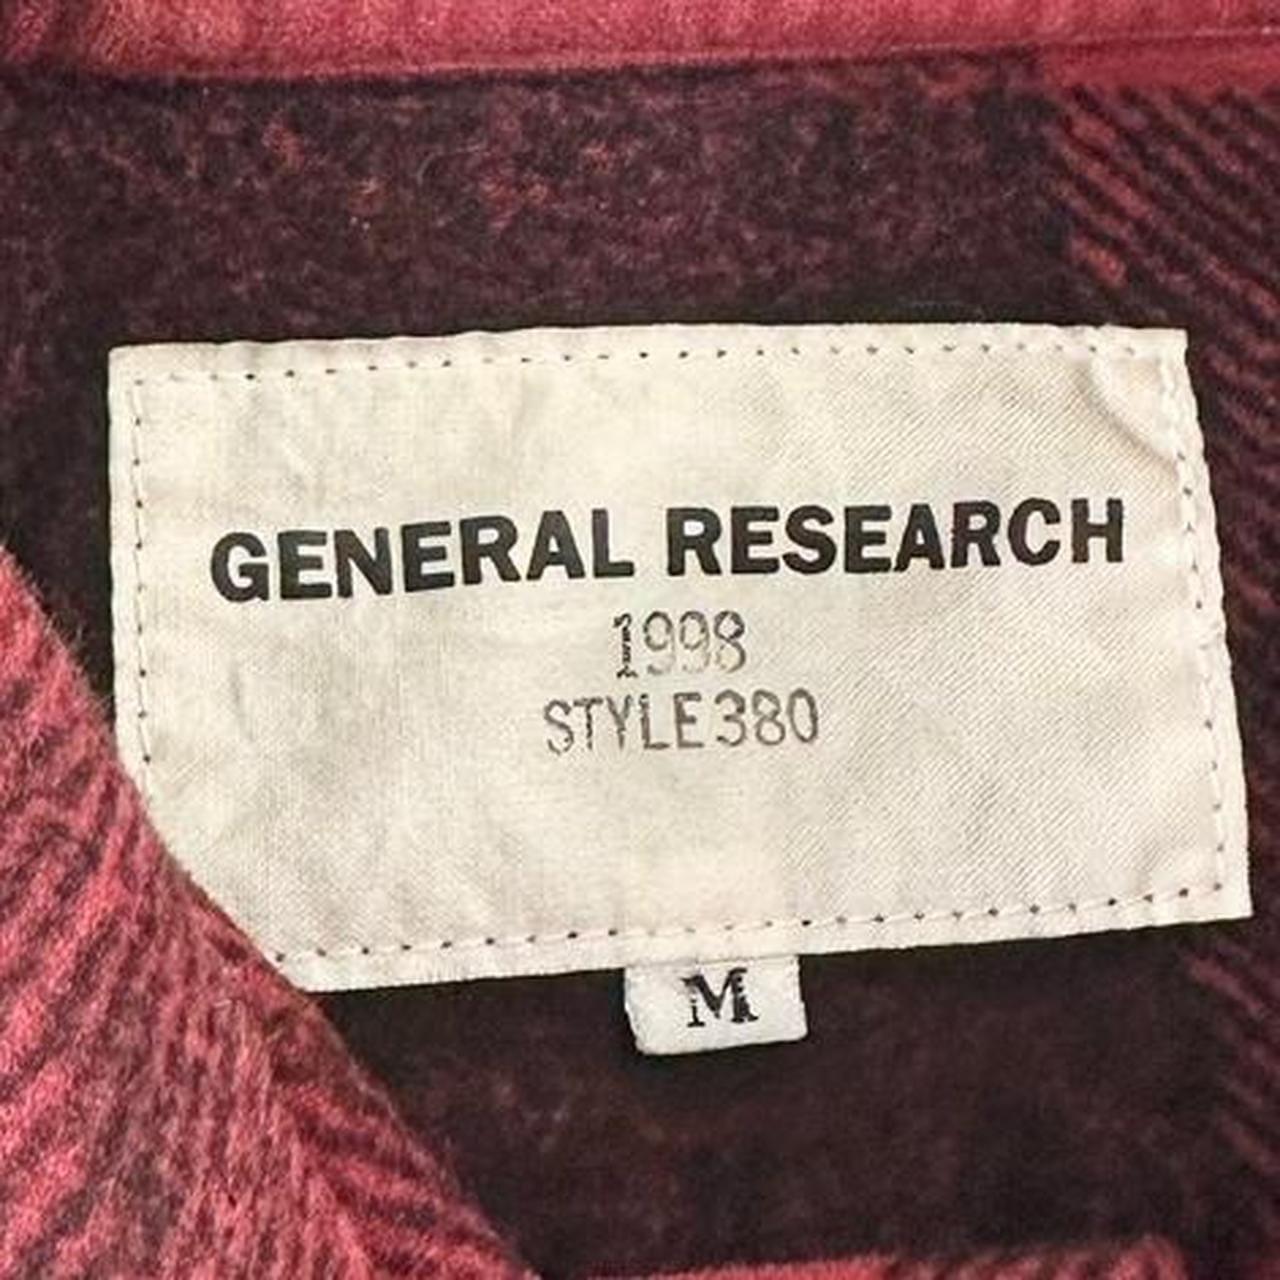 General Research multi pocket button shirt size M - Known Source